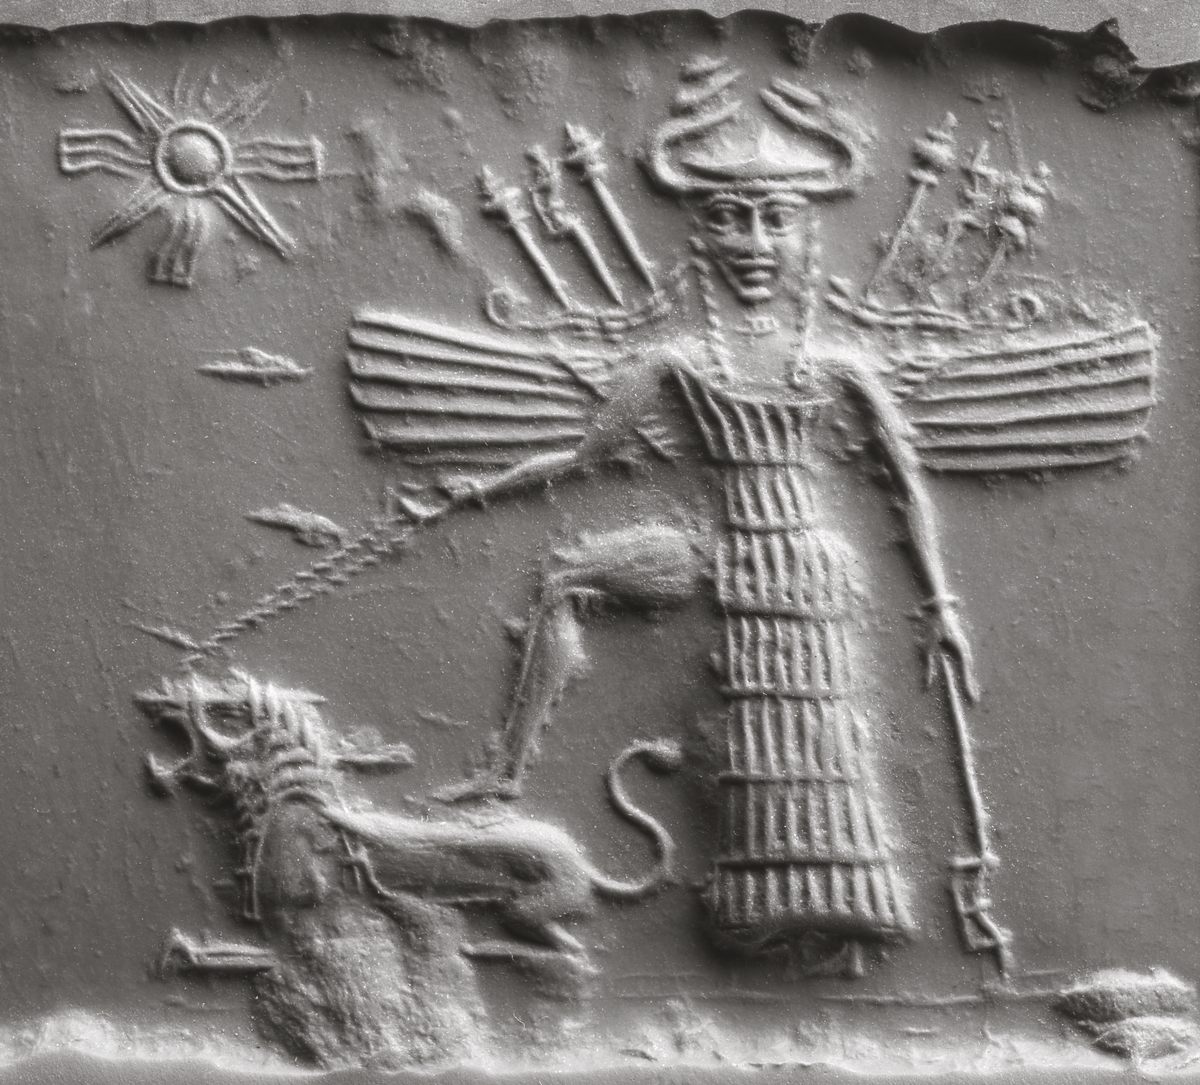 This seal depicts Ishtar, the powerful Akkadian war goddess who Enheduanna merged with the Sumerian fertility goddess Inanna.